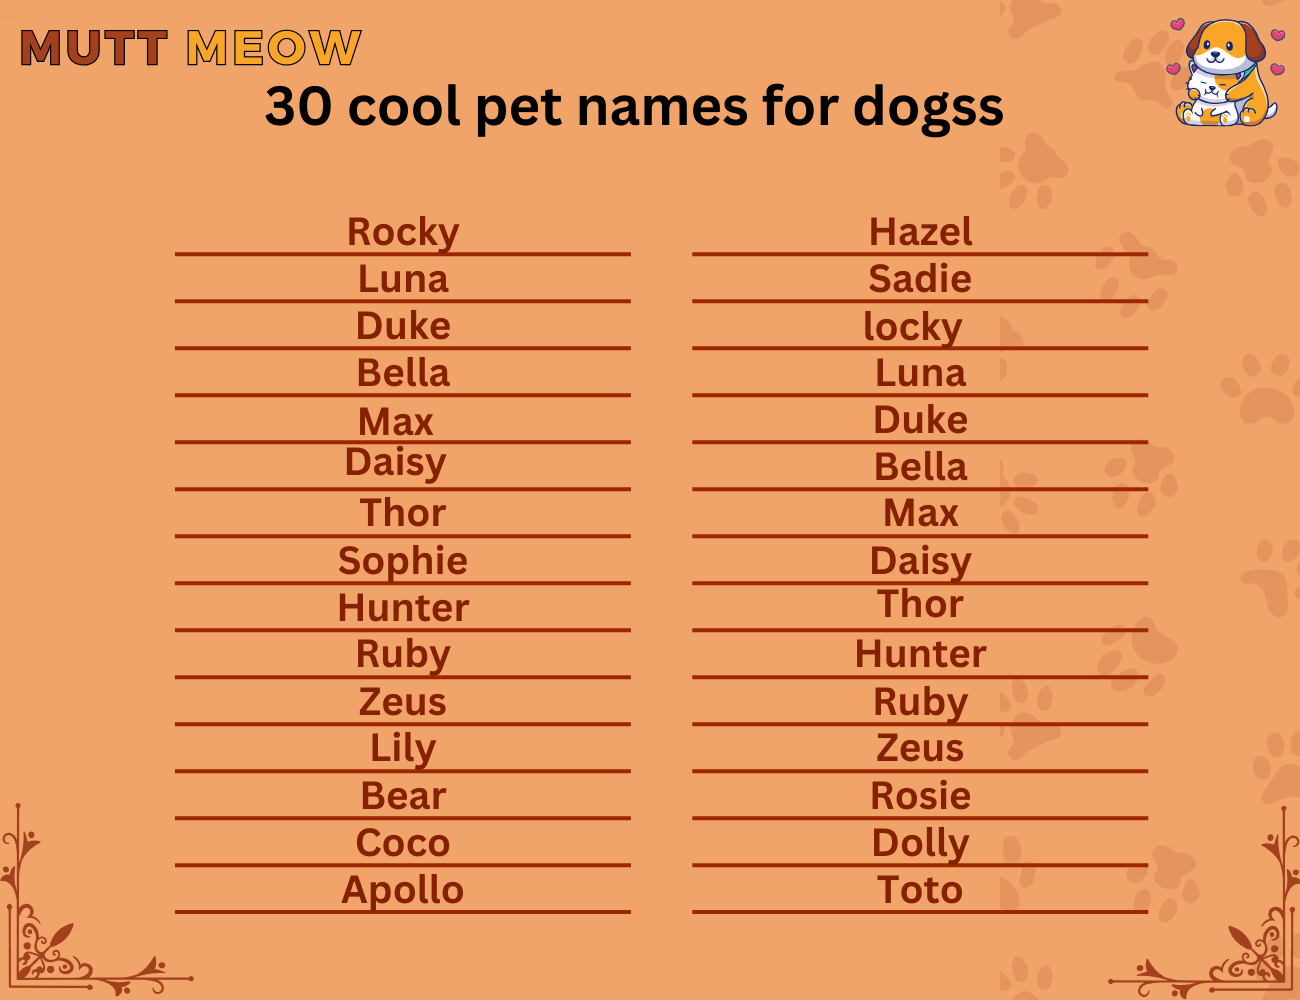 30 cool pet names for dogs